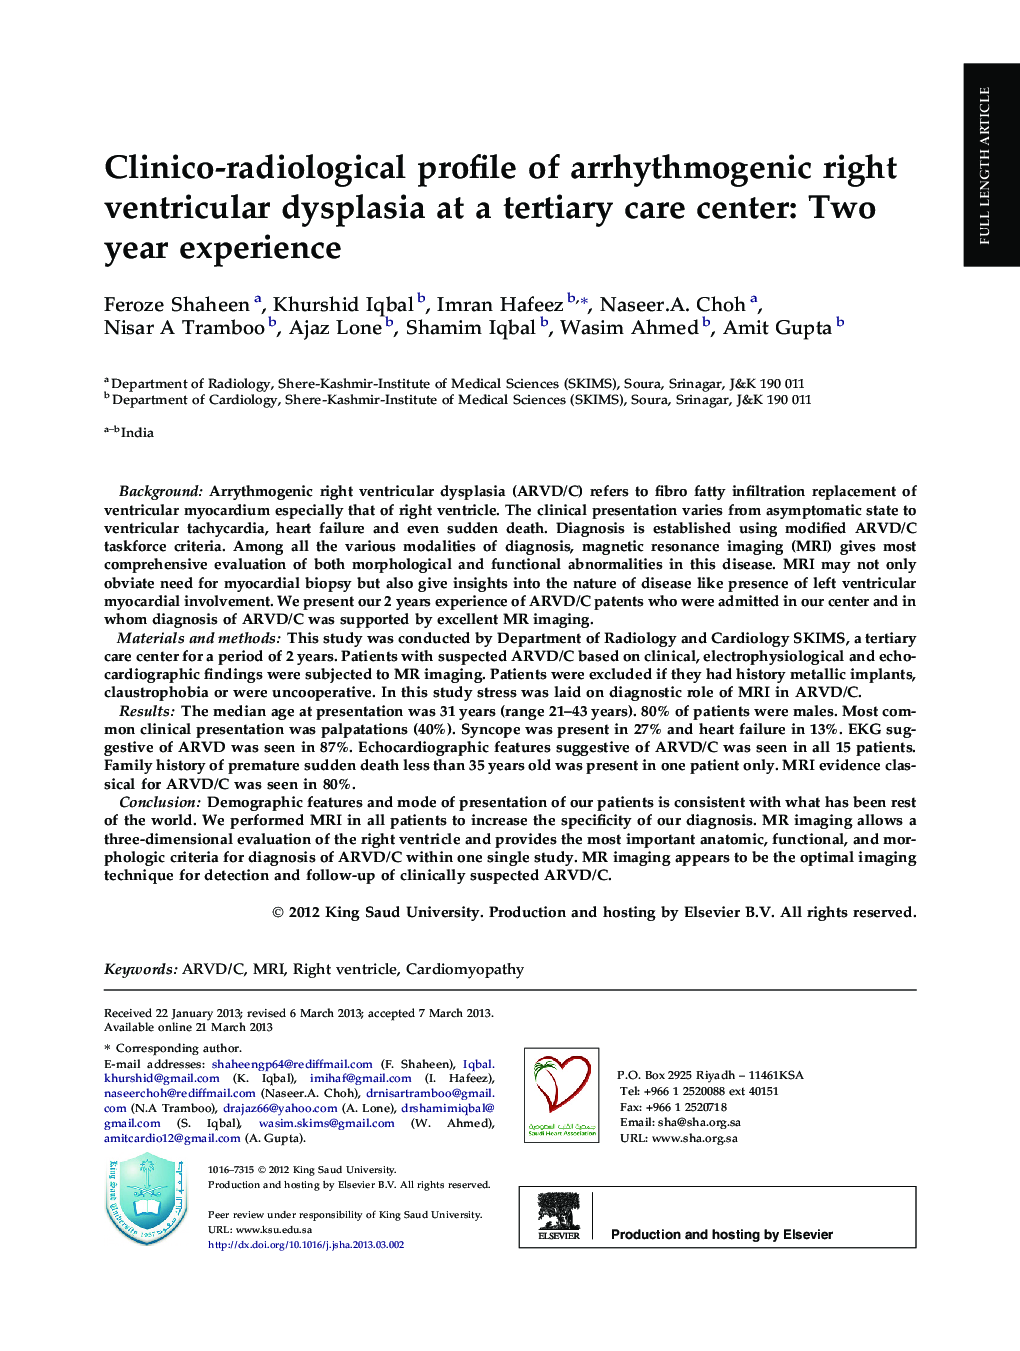 Clinico-radiological profile of arrhythmogenic right ventricular dysplasia at a tertiary care center: Two year experience 